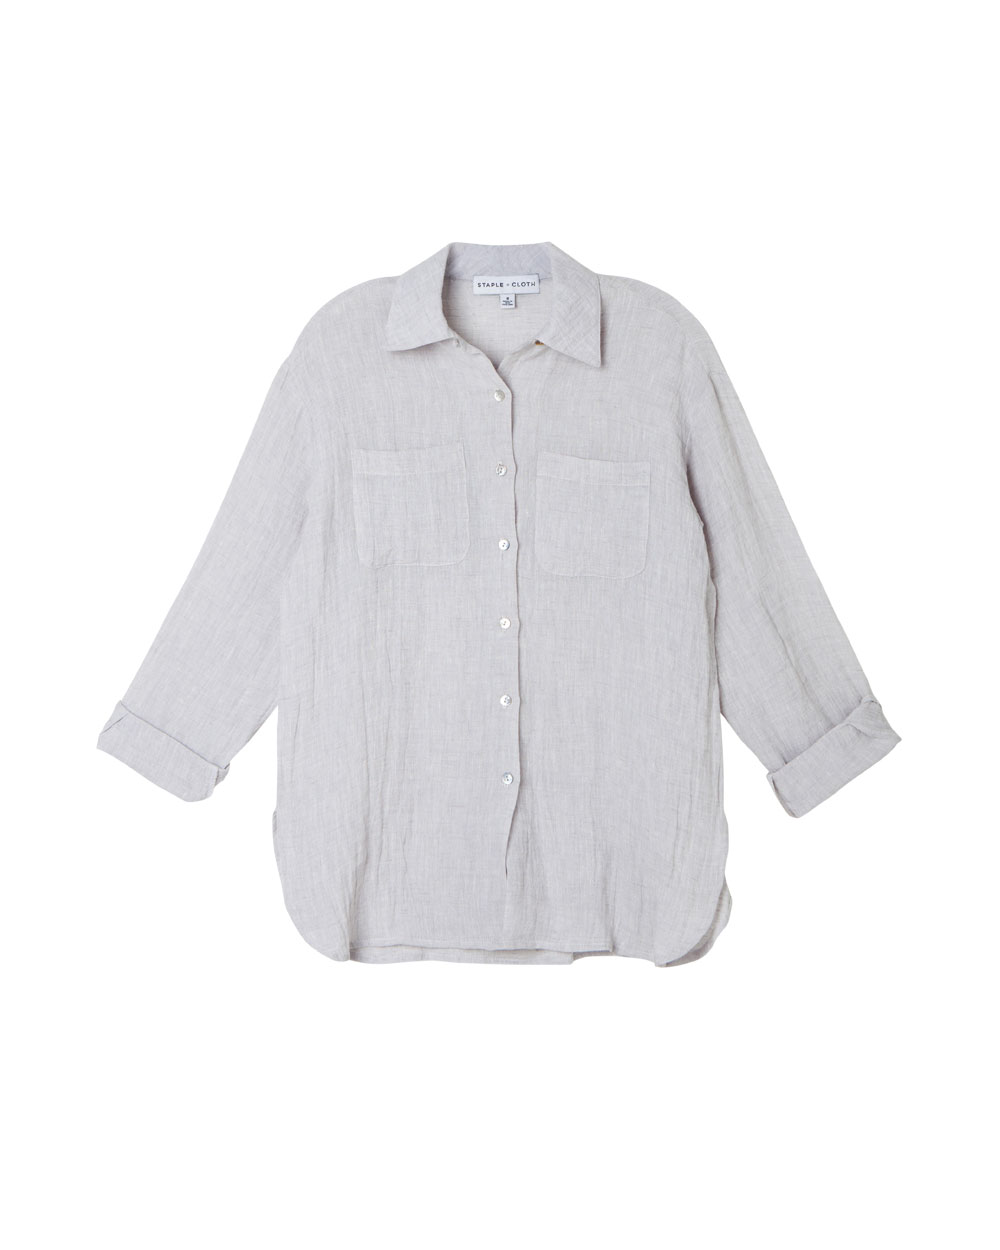 THE LINEN SHIRT: $265 from Staple + Cloth